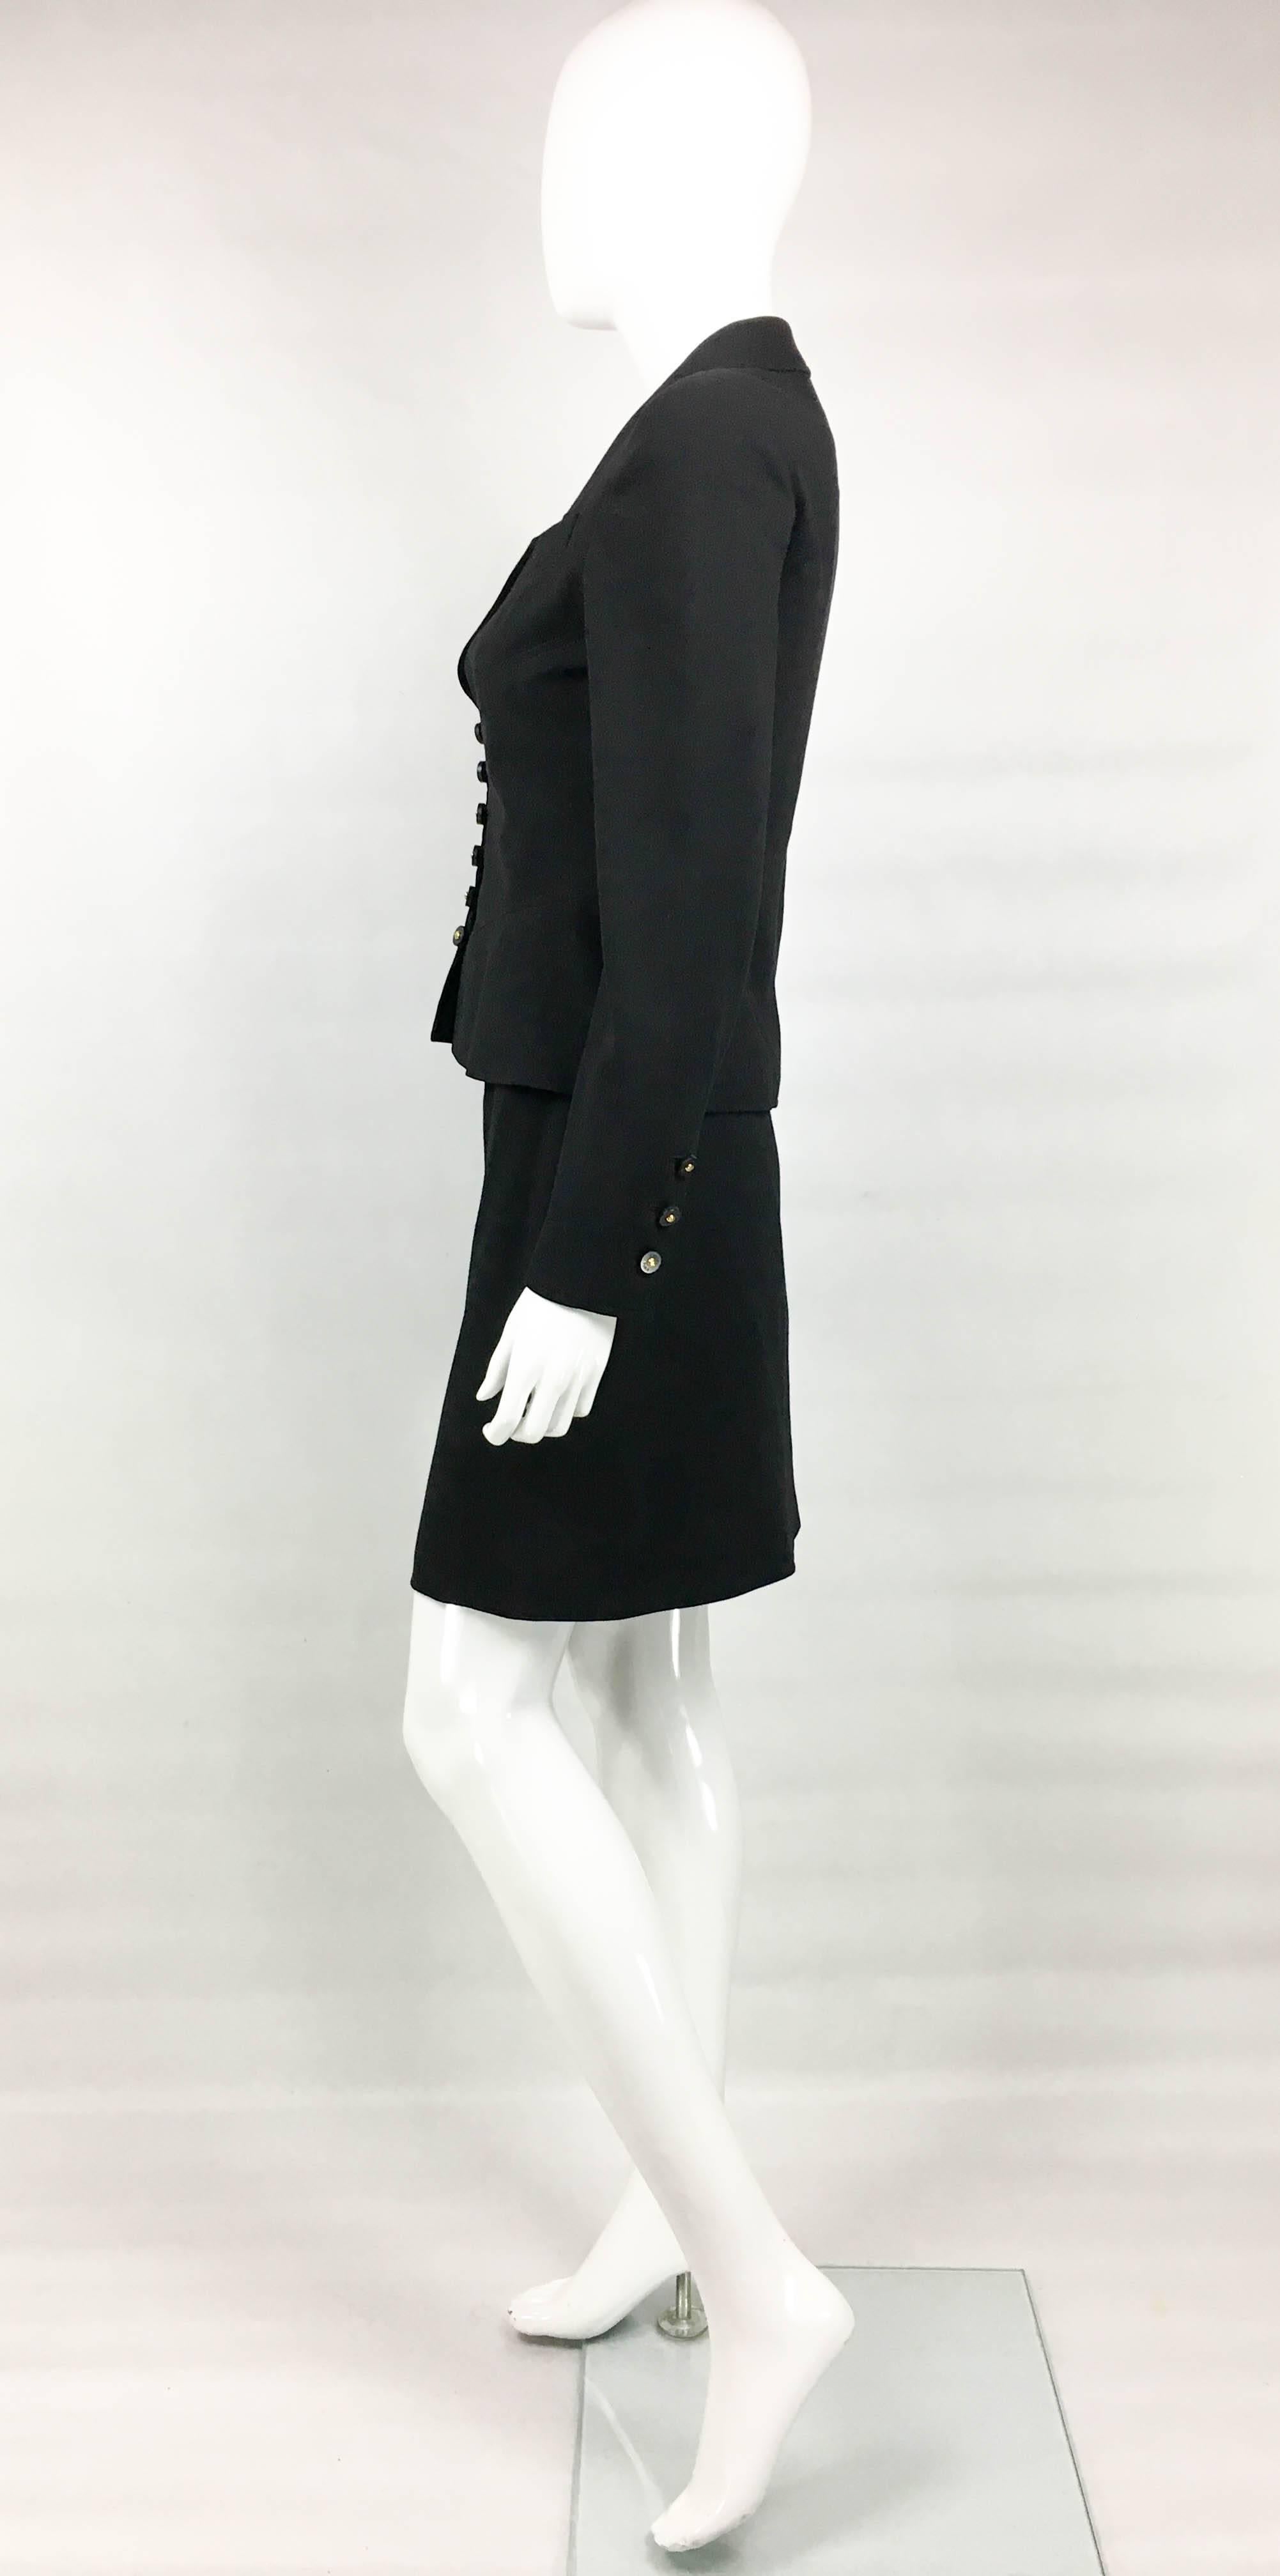 1997 Chanel Black Wool Skirt Suit For Sale 3